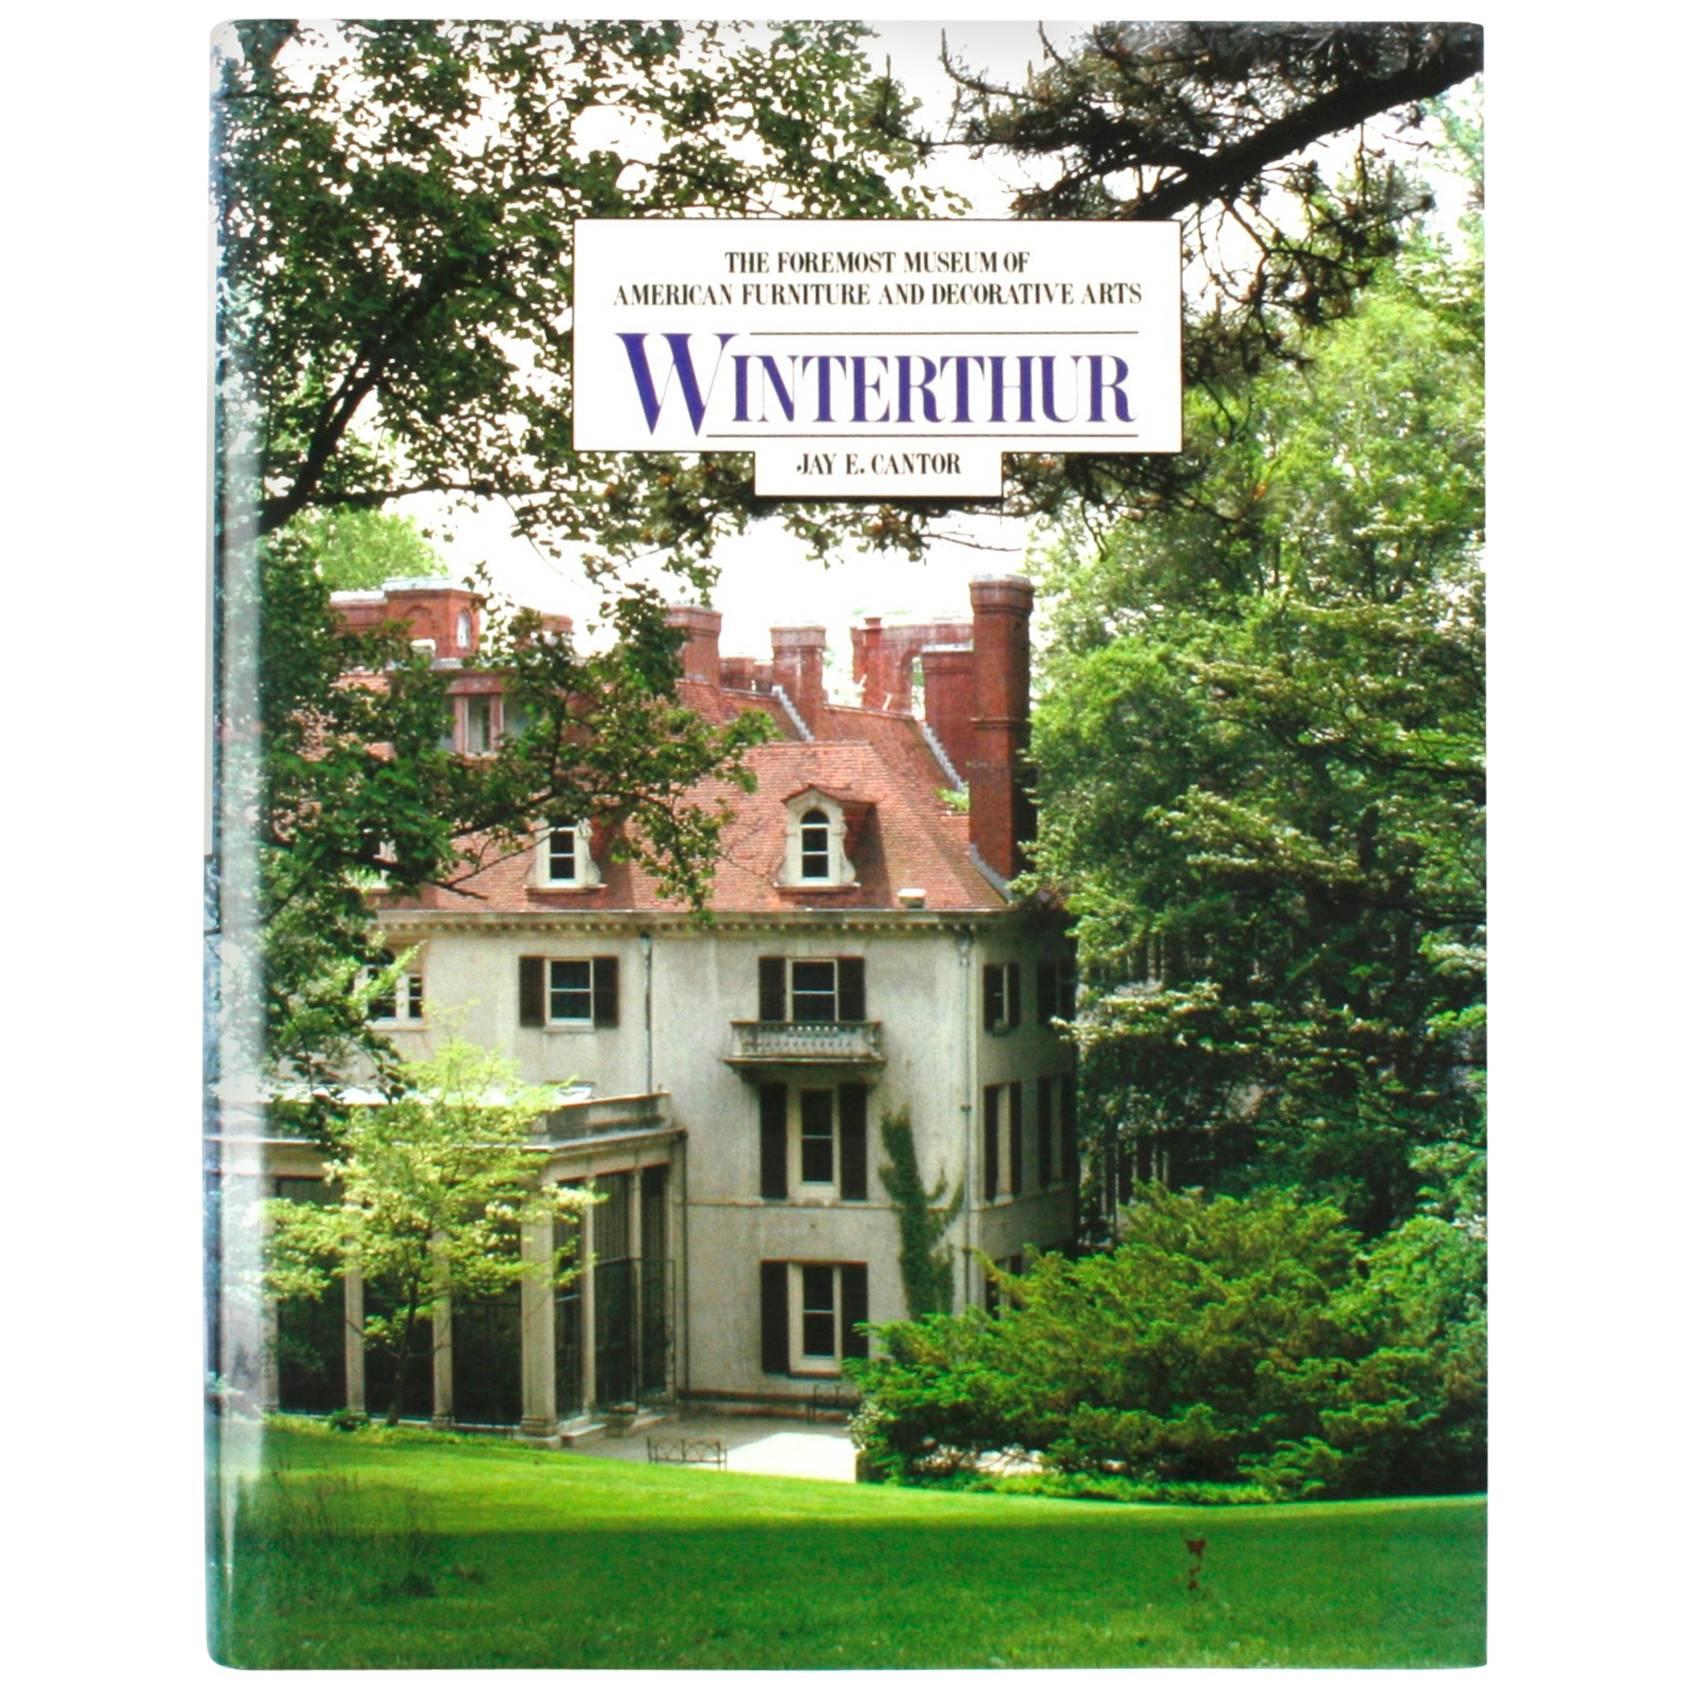 Winterthur by Jay E. Cantor, First Edition